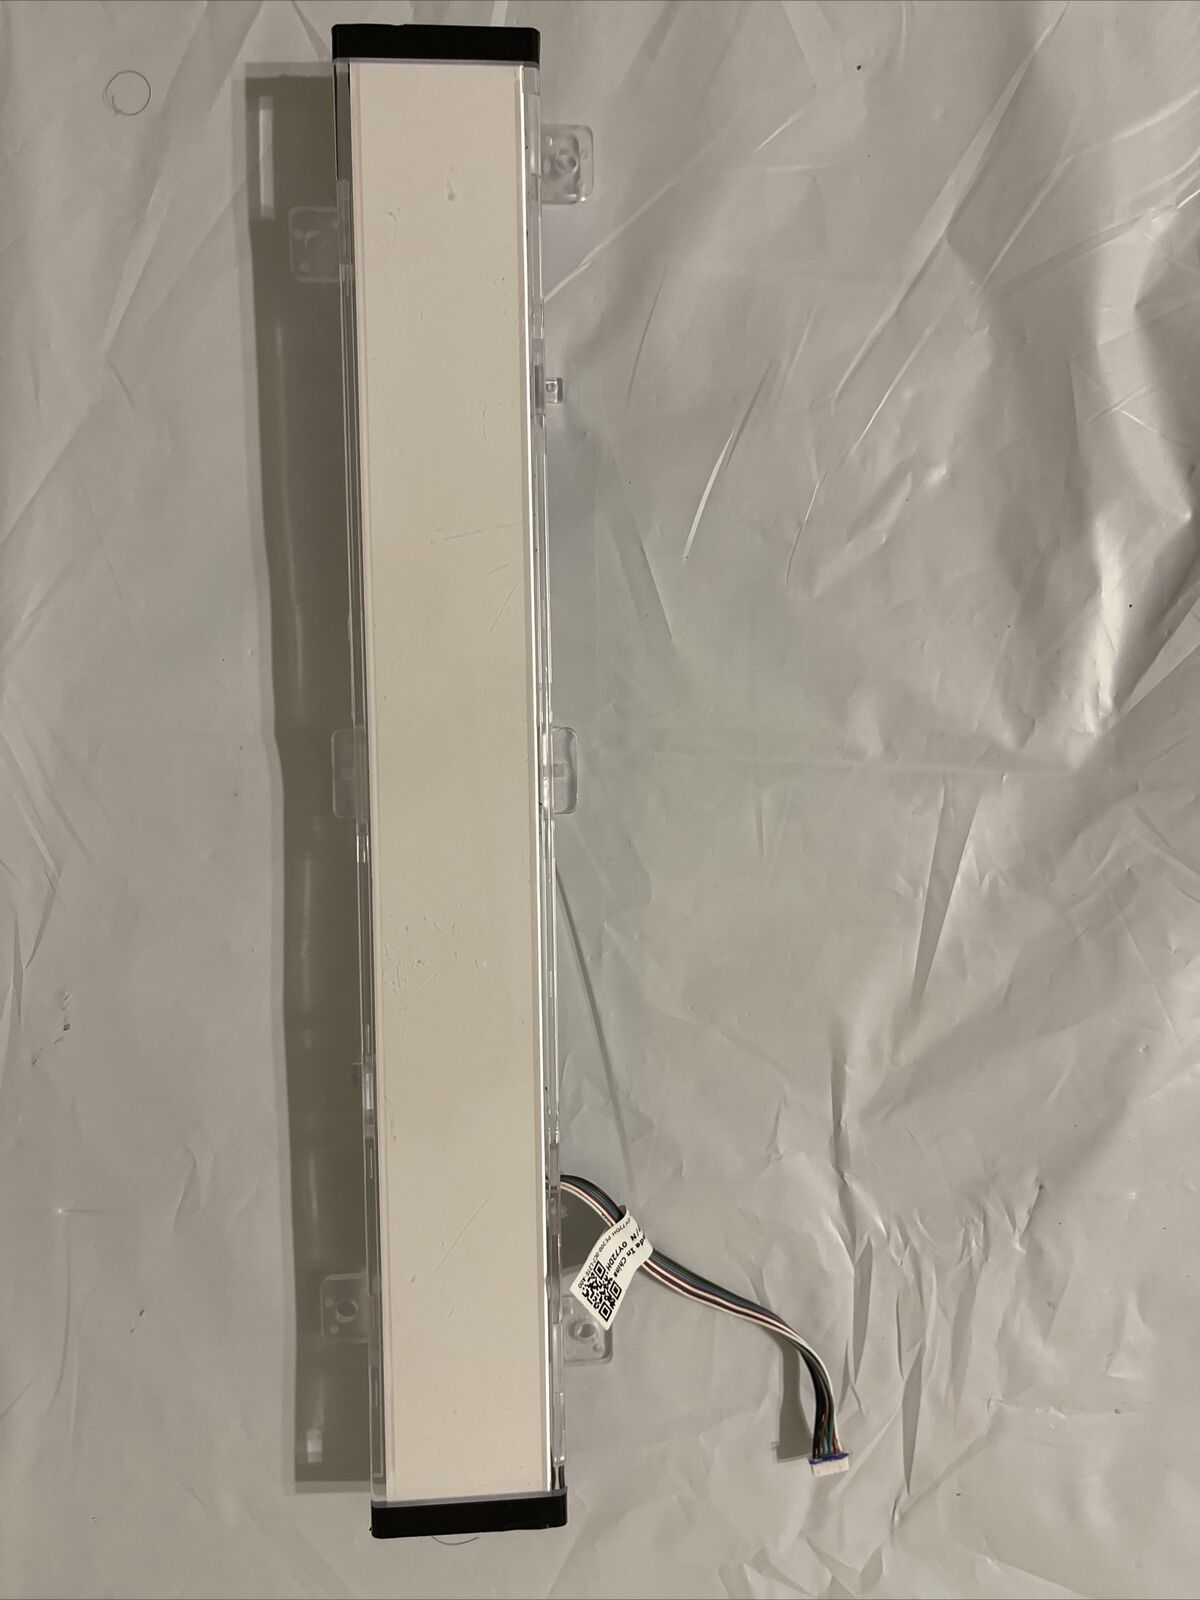 Right Tron Light Board, Dell Aurora Right side LED replacement Y72DH 0Y72DH